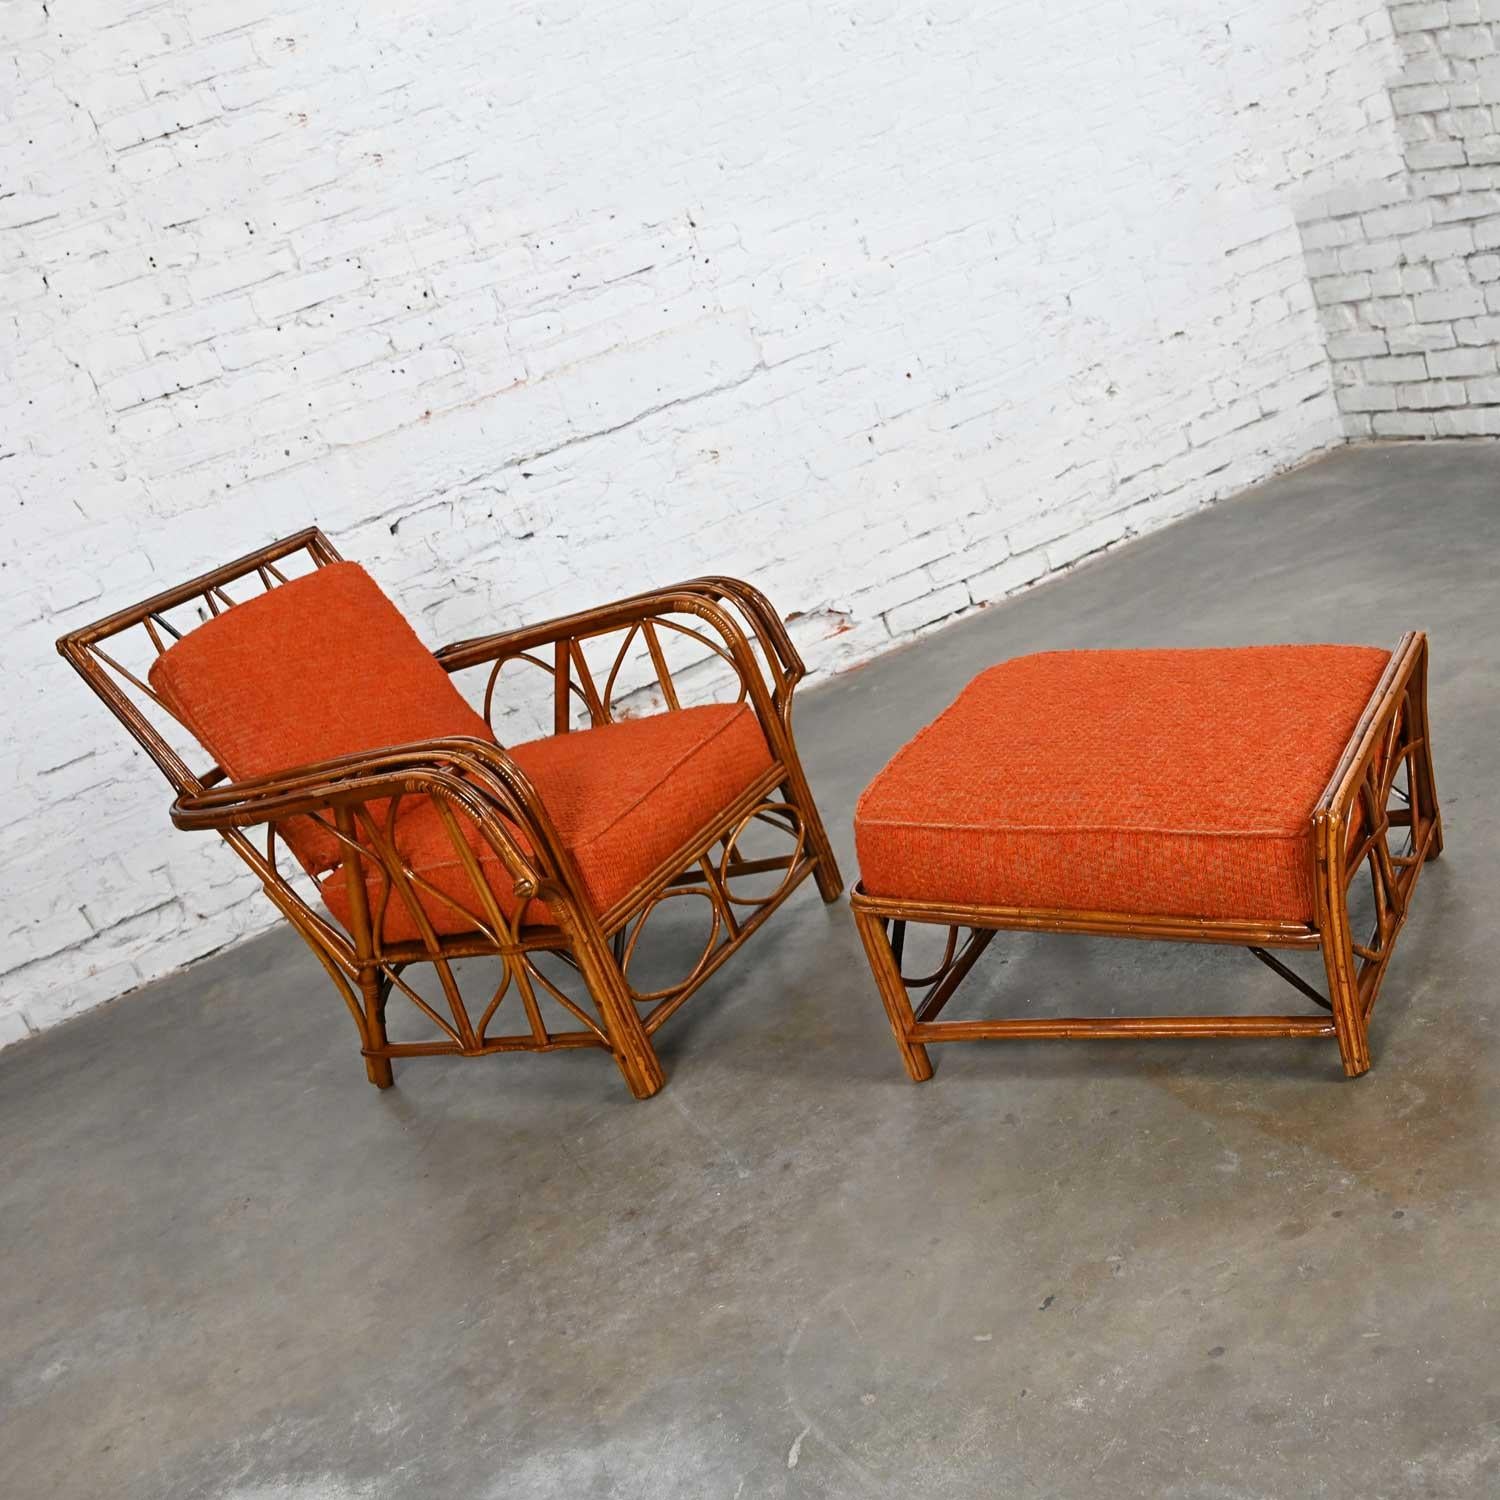 Rattan Lounge Chair & Ottoman Orange Fabric Cushions by Helmers Manufacturing Co 11